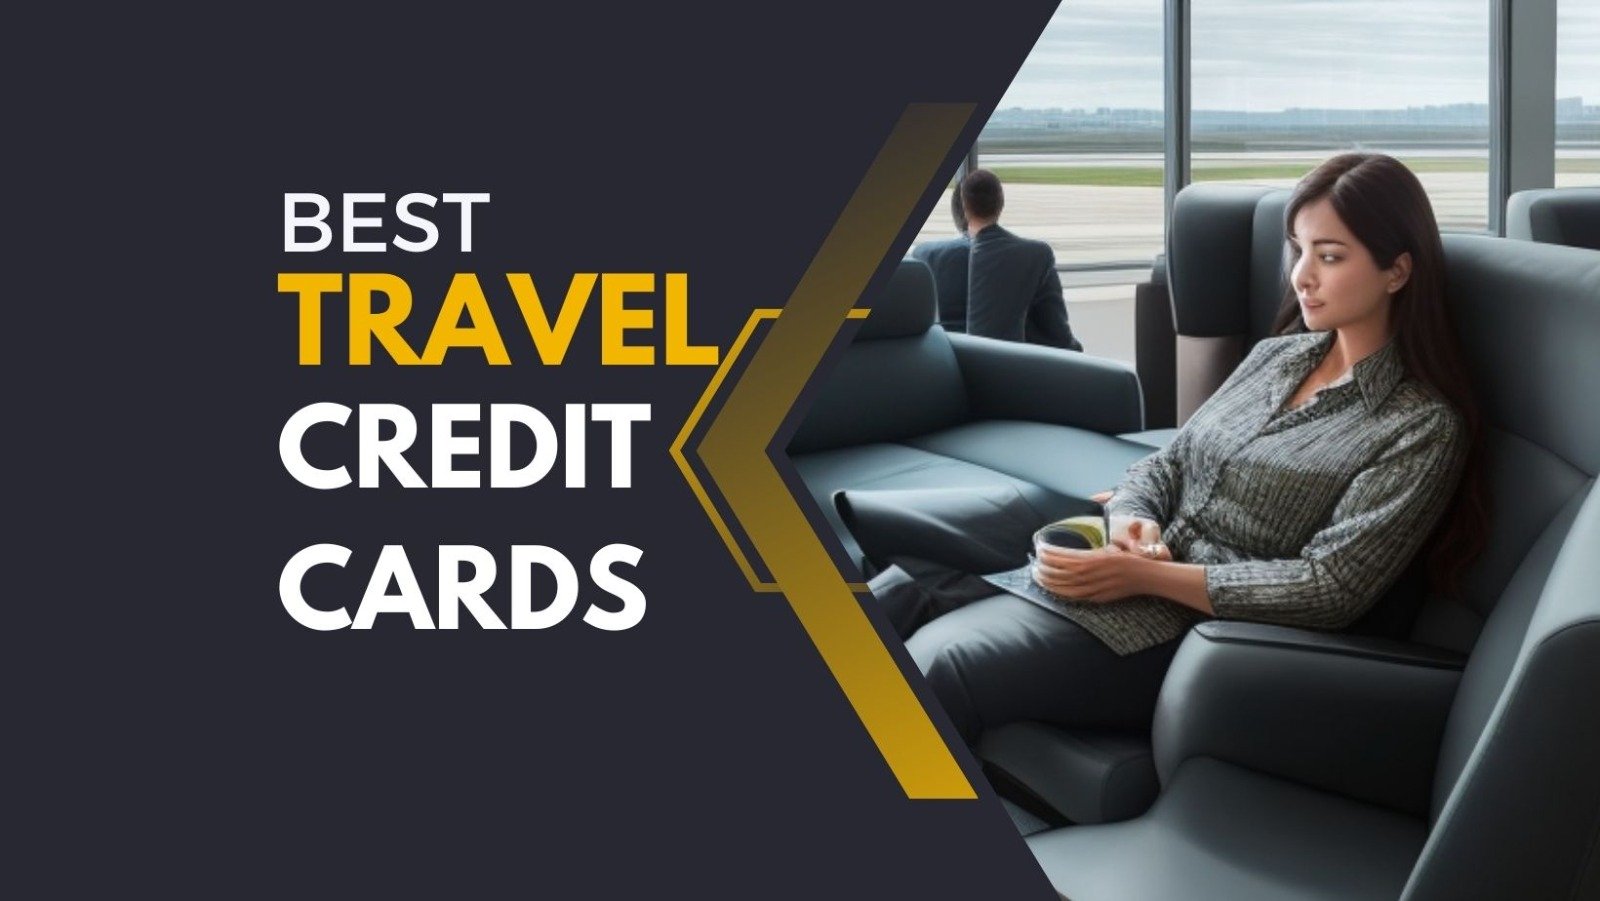 What is the Best Credit Card to have for Traveling? #Best Travel Credit Cards